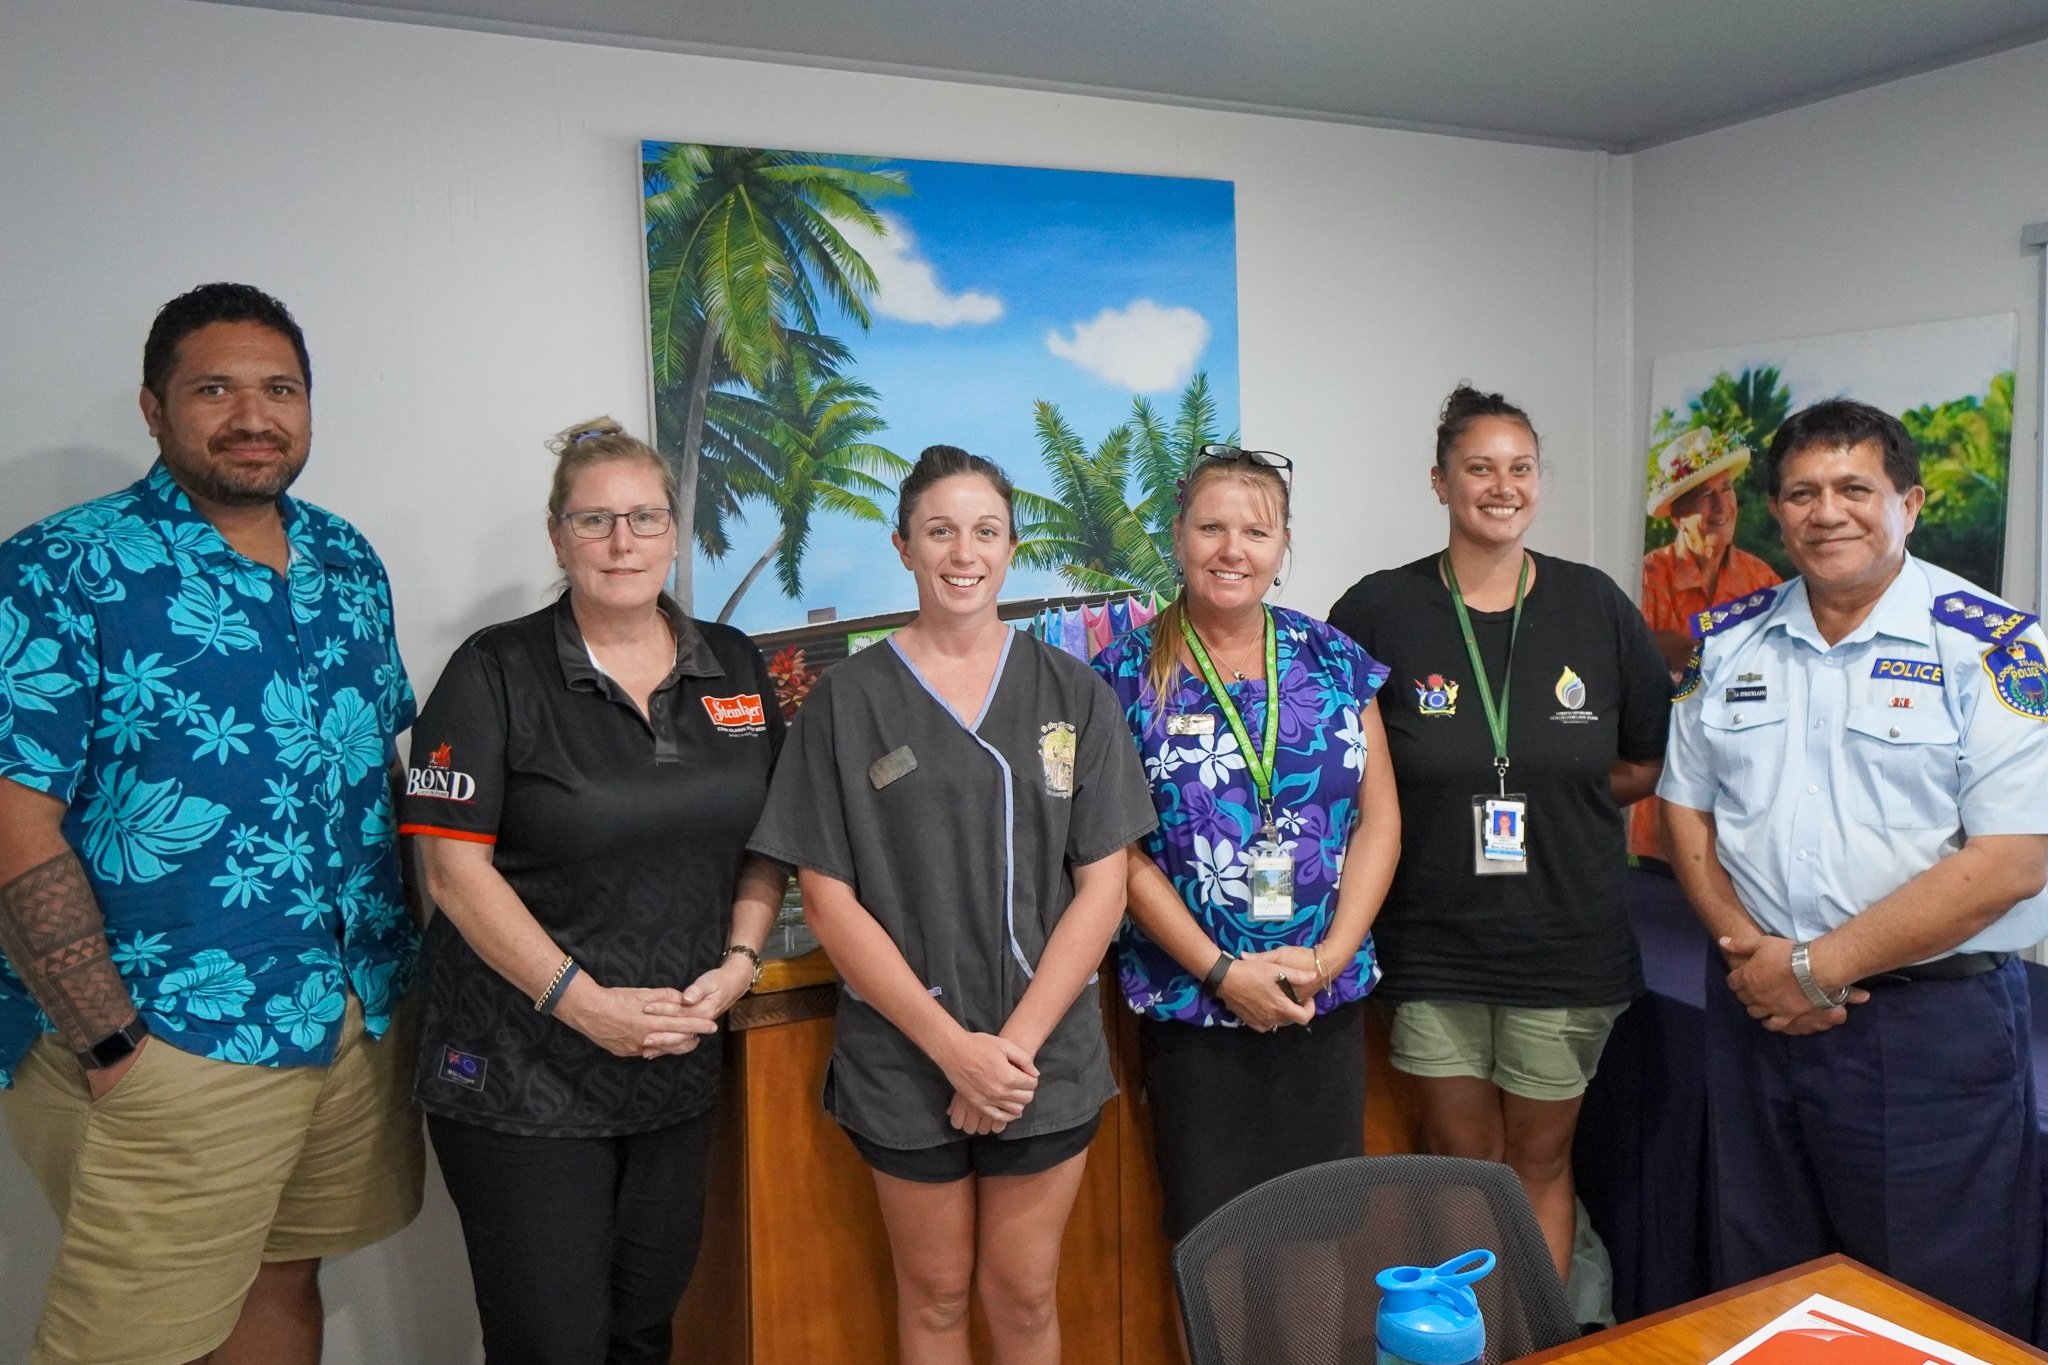 Members of the Dog Registration and Animal Control Committee. From left: Christian Mani (Cook Islands Tourism), Trish Barton (Te Are Manu), Dr. Ellen McBryde (Te Are Manu), Jennie George (CISPCA), Aketairi Roberts (Ministry of Agriculture), Inspector John Strickland (Cook Islands Police Services.